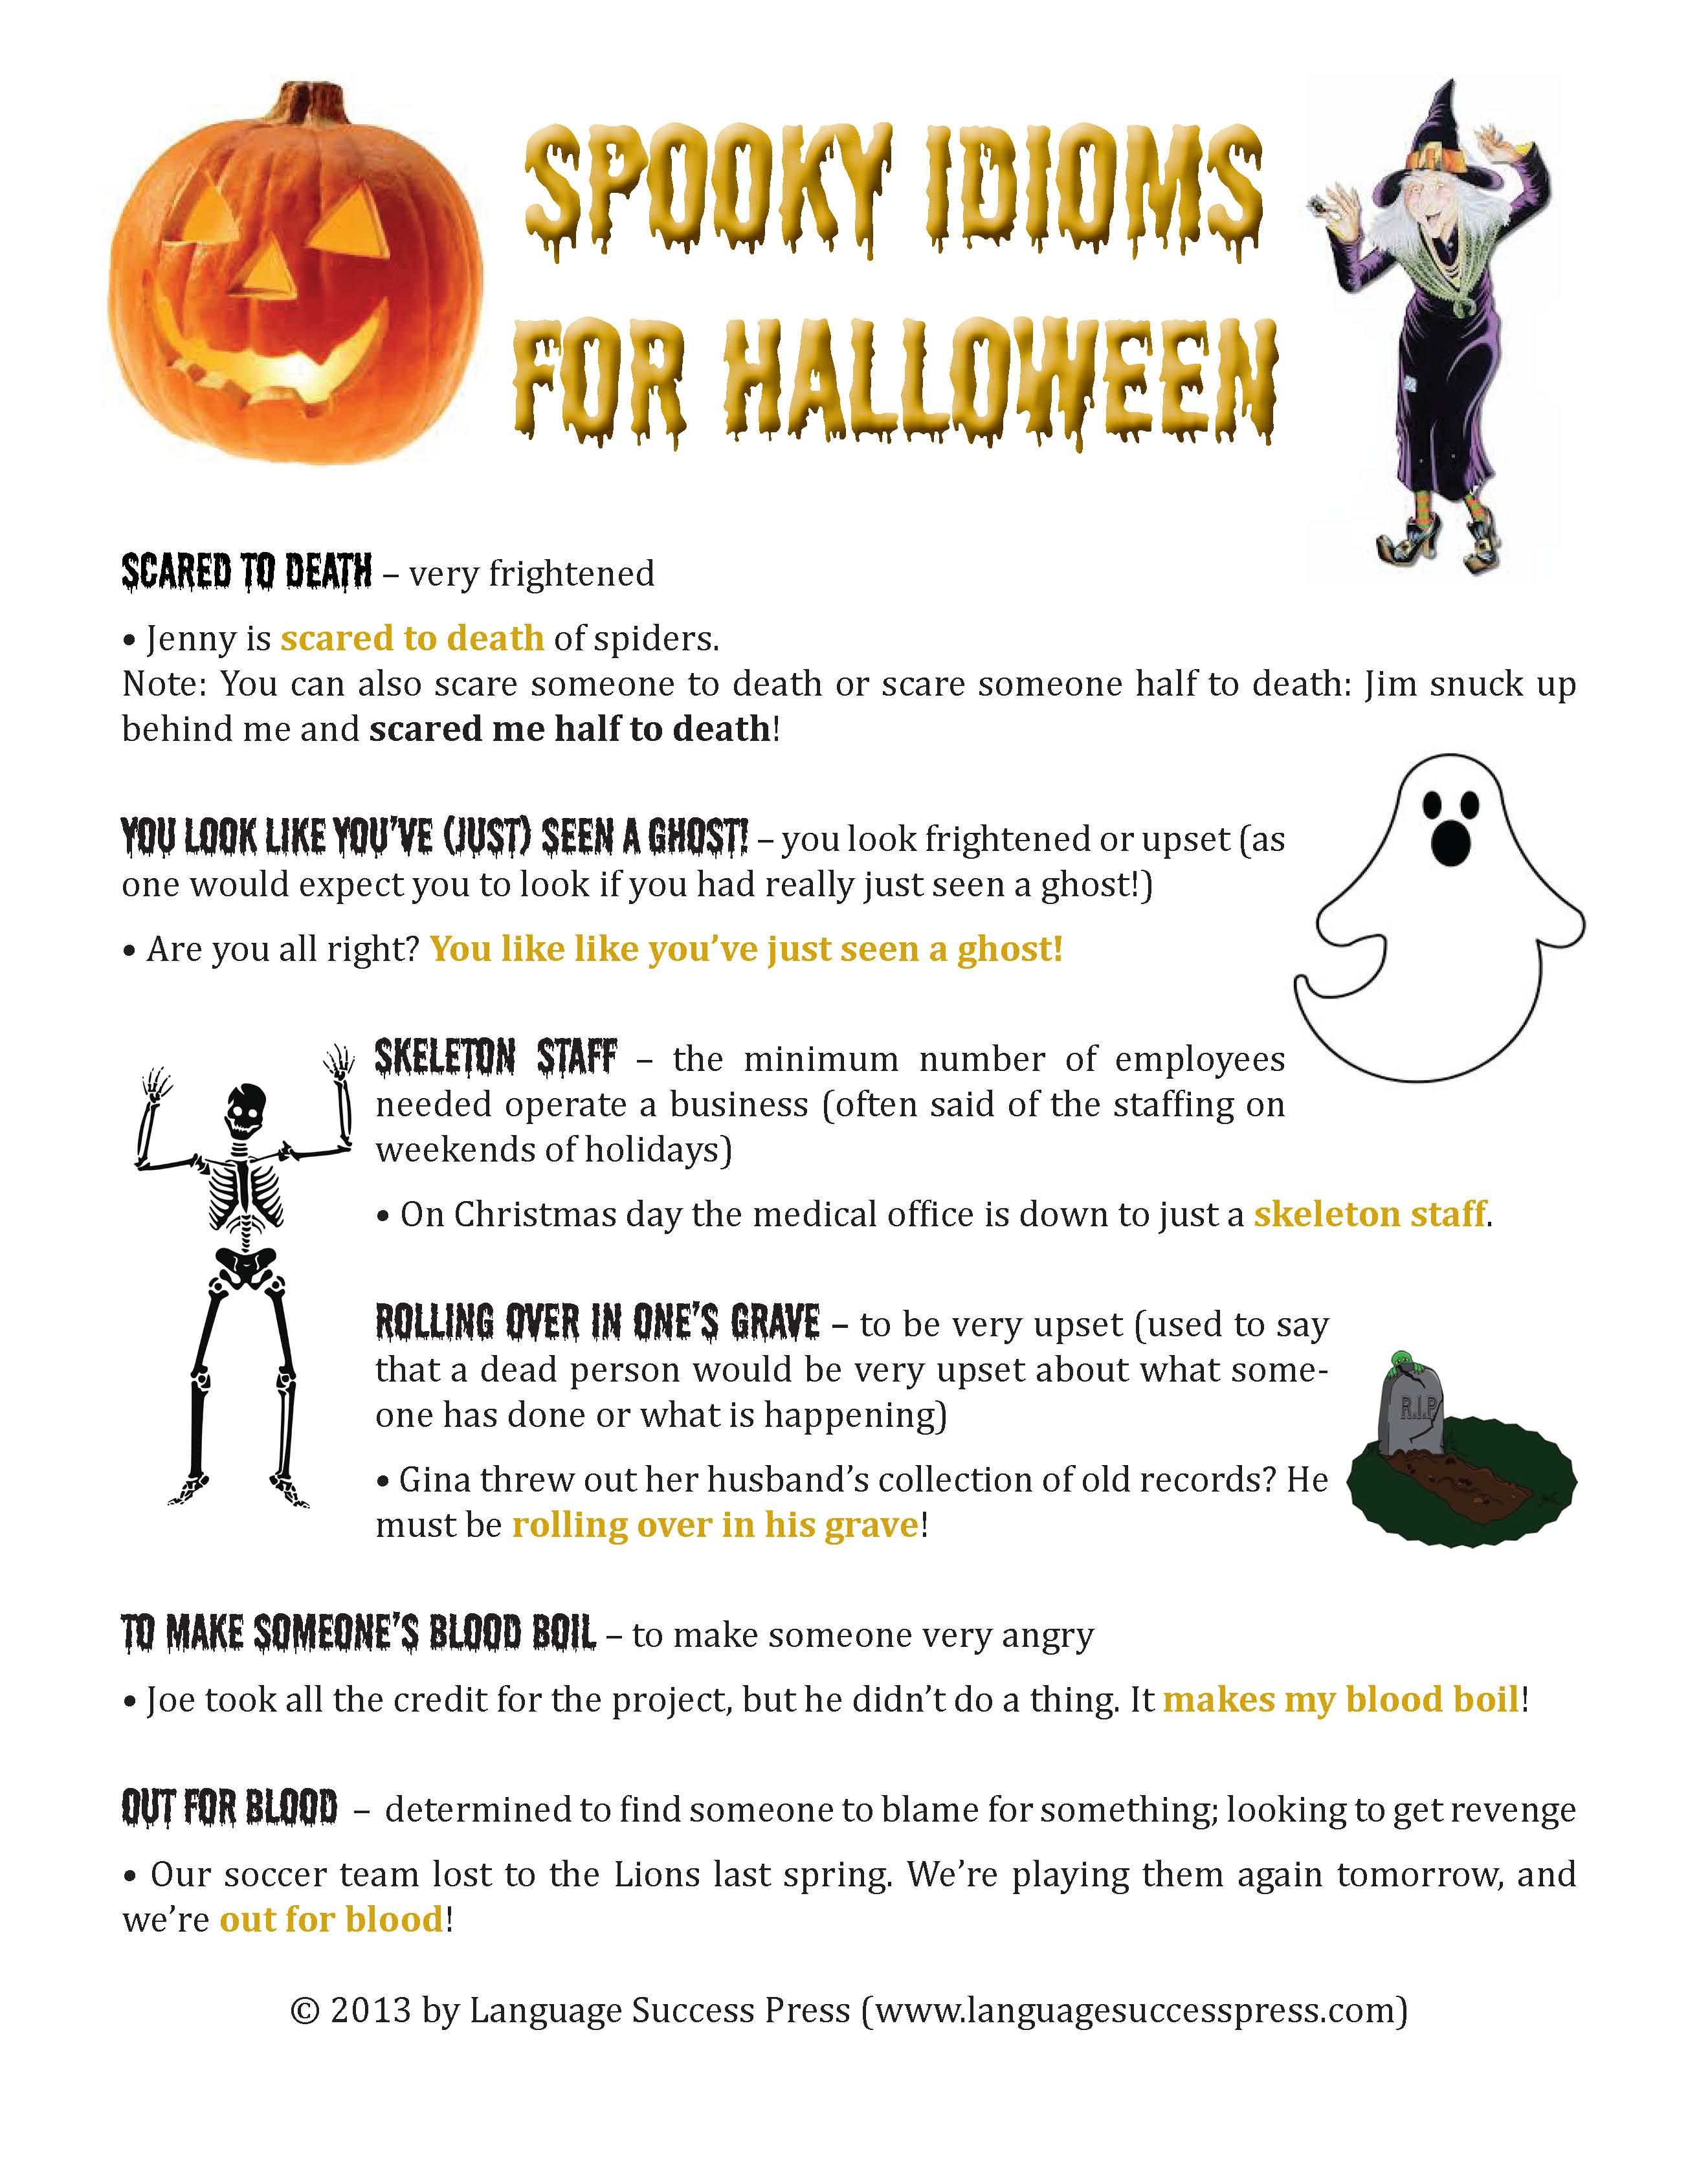 Top 10 Halloween idioms and expressions